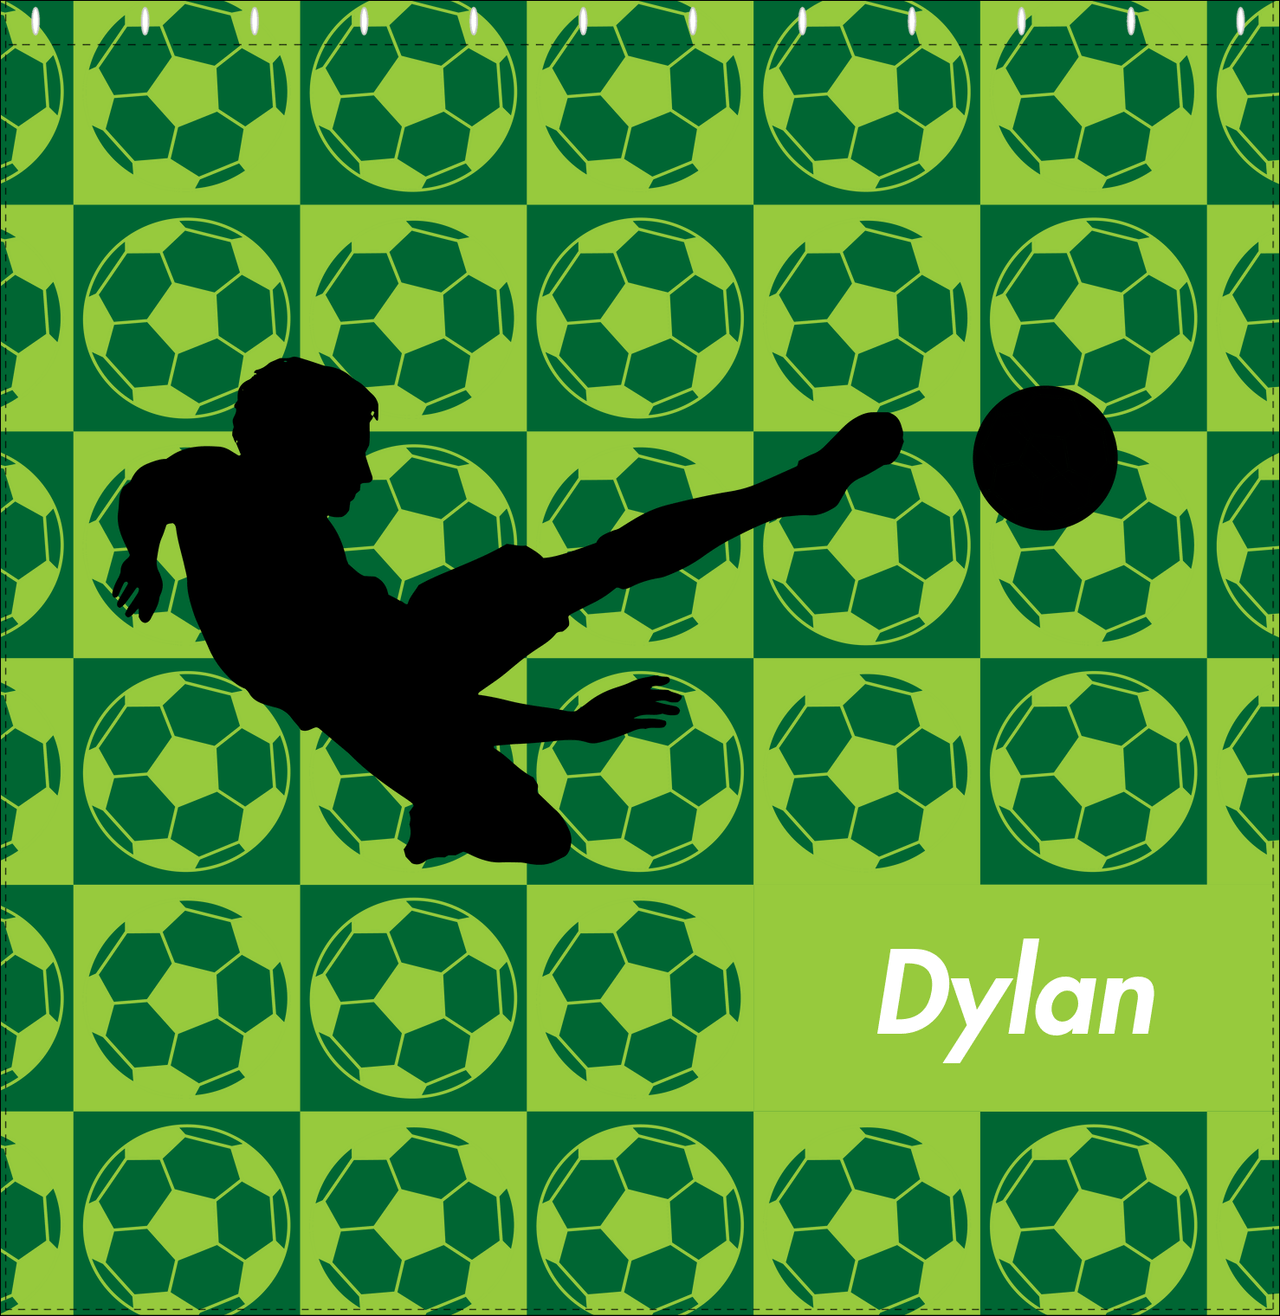 Personalized Soccer Shower Curtain XLVI - Green Background - Boy Silhouette I - Decorate View